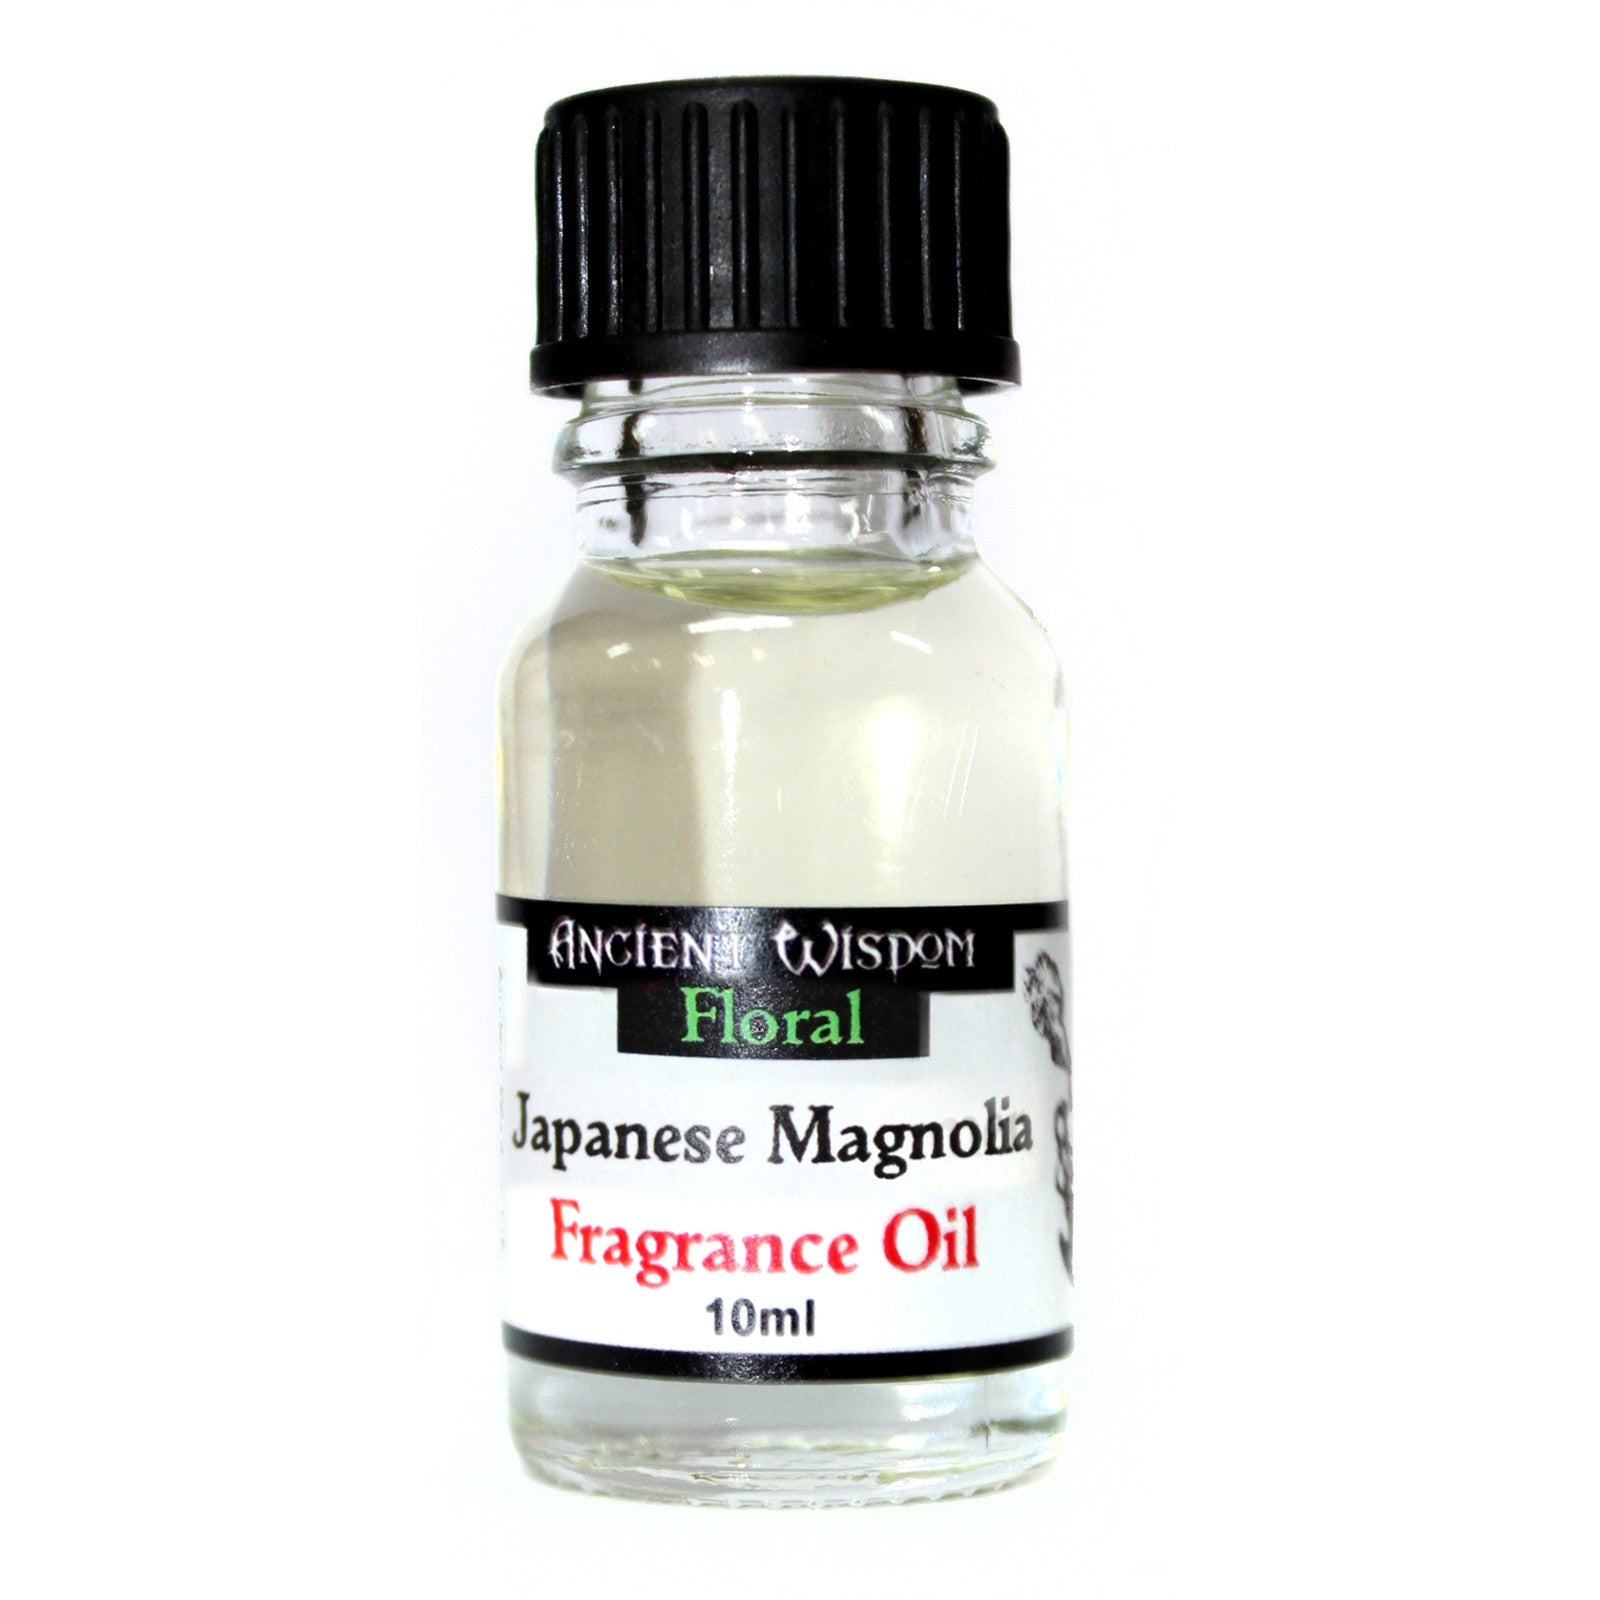 View 10ml Japanese Magnolia Fragrance Oil information